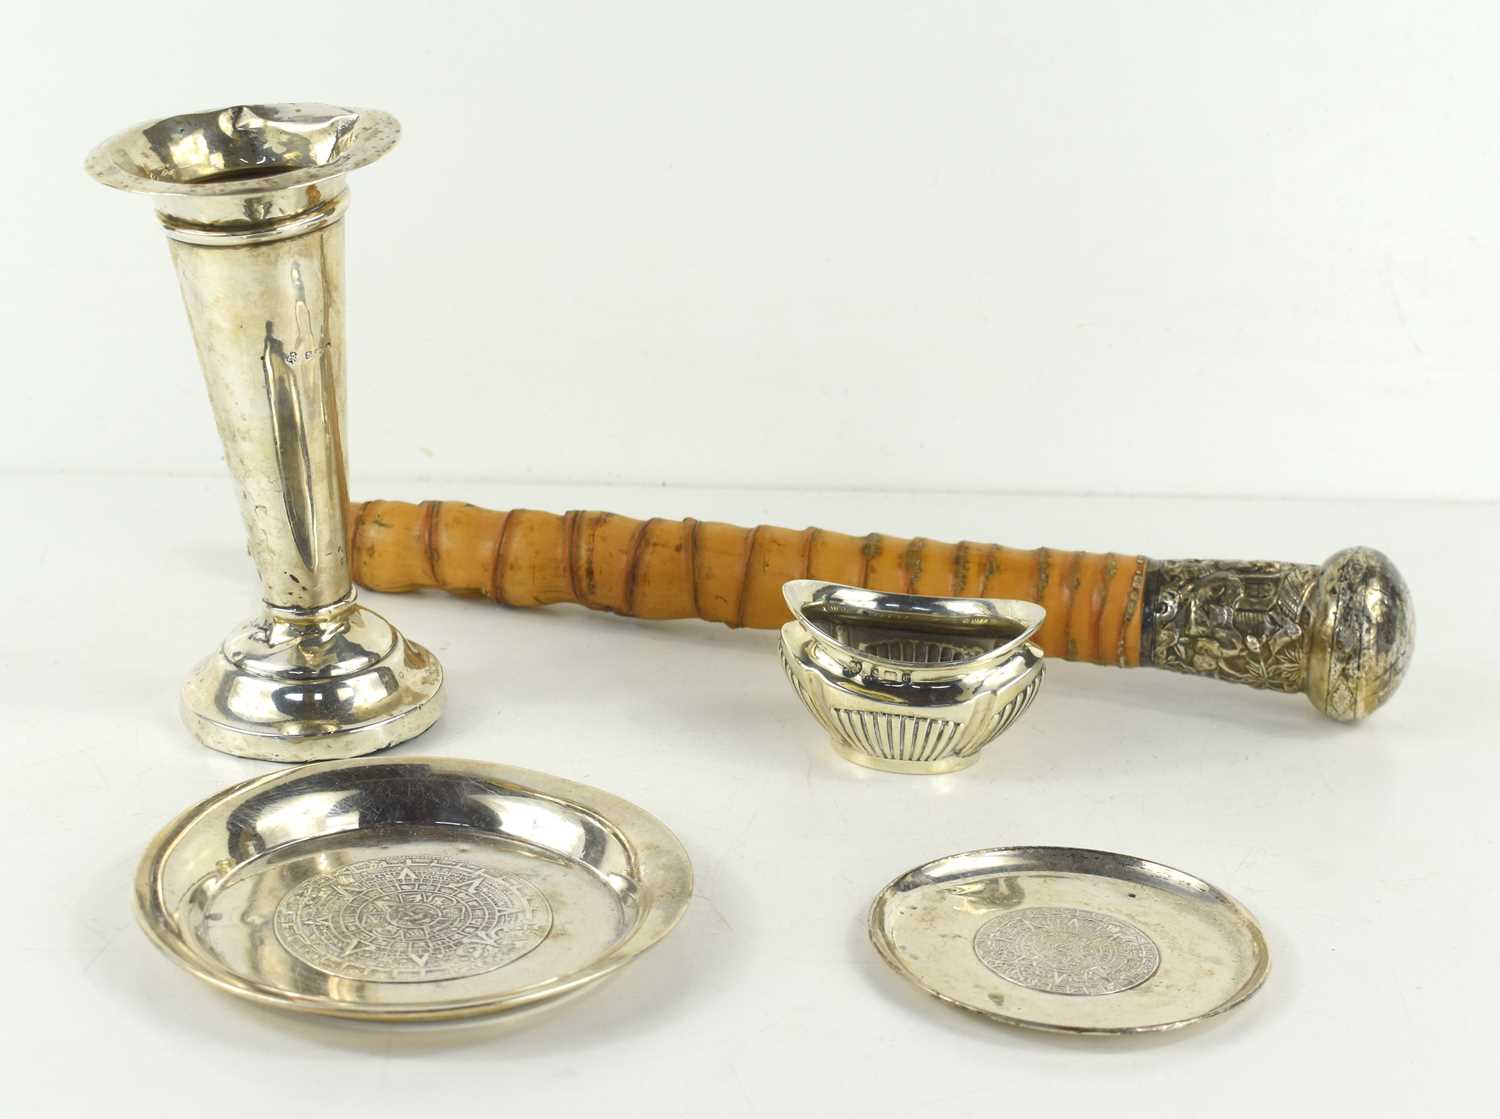 Two sterling silver Mexican dishes, a silver bud vase with weighted base, a silver salt, a white